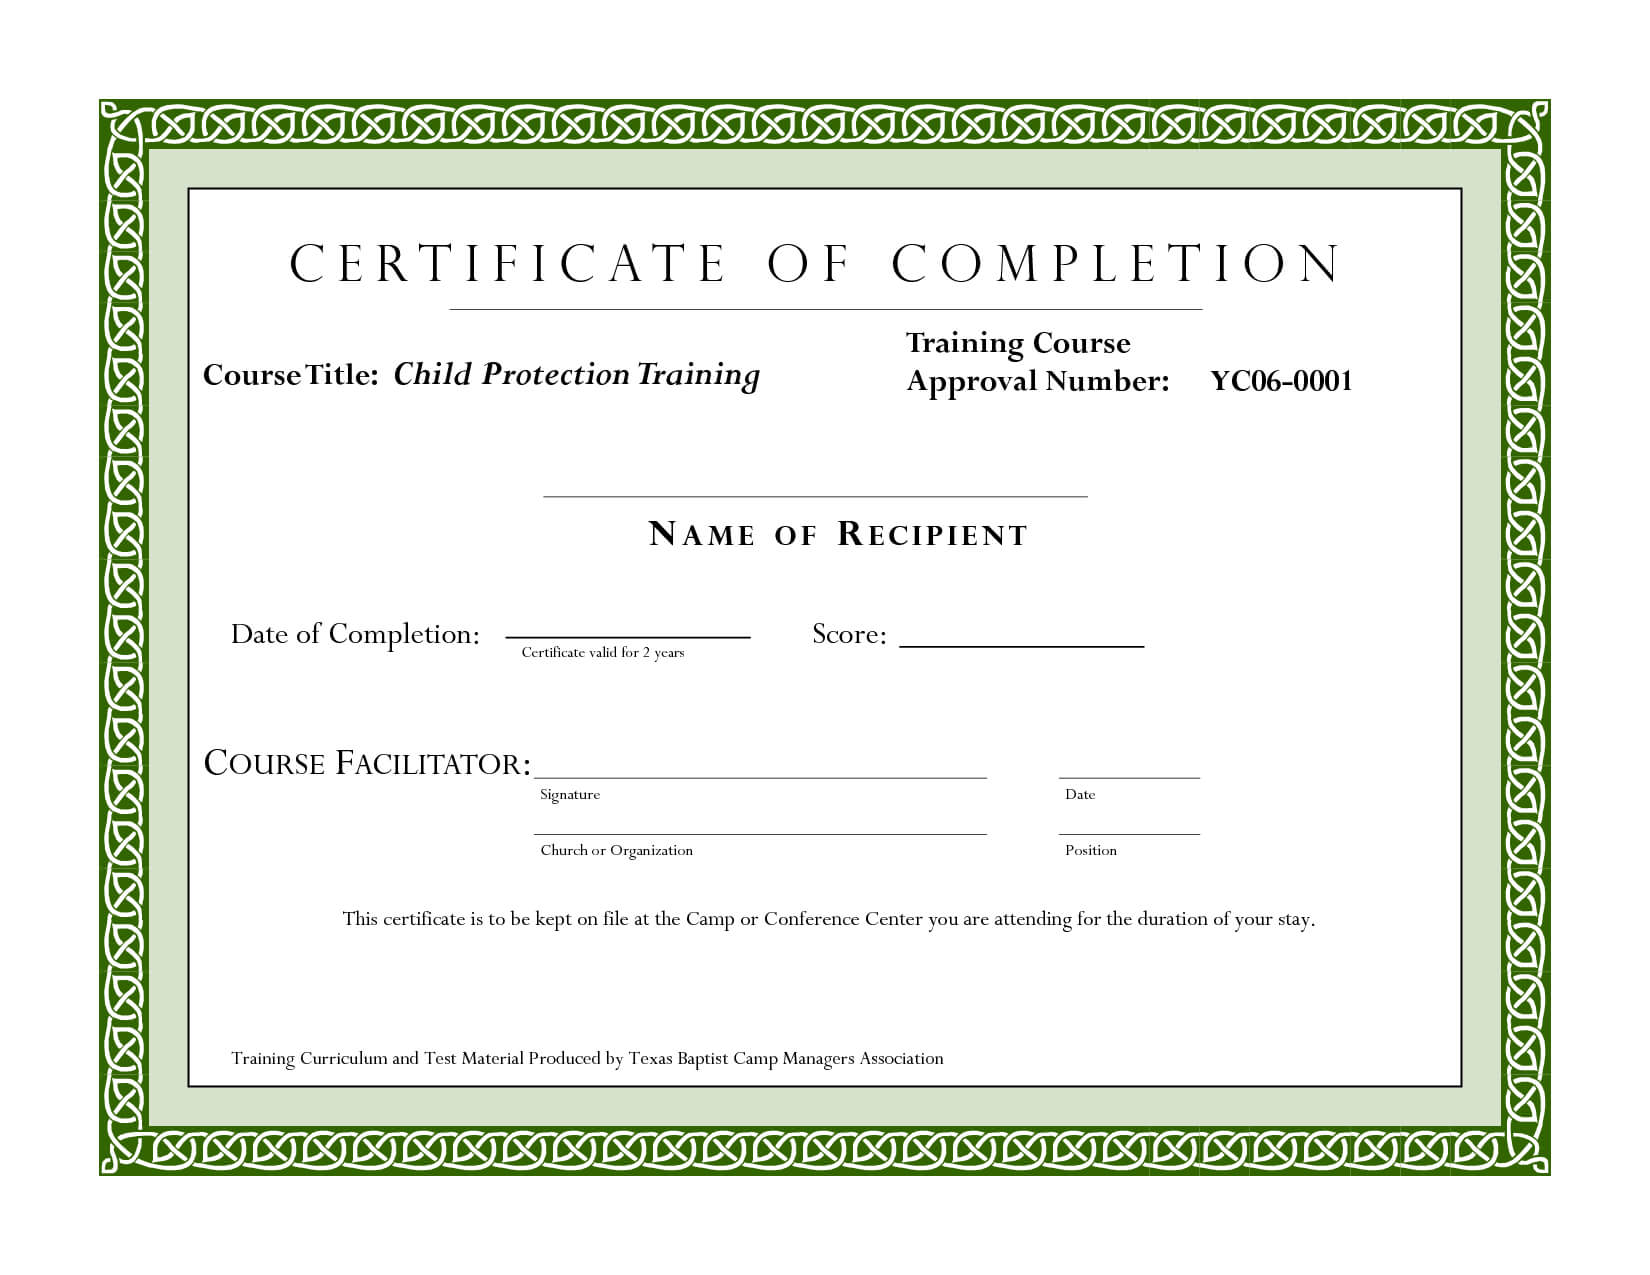 Course Completion Certificate Template | Certificate Of Throughout Free Training Completion Certificate Templates